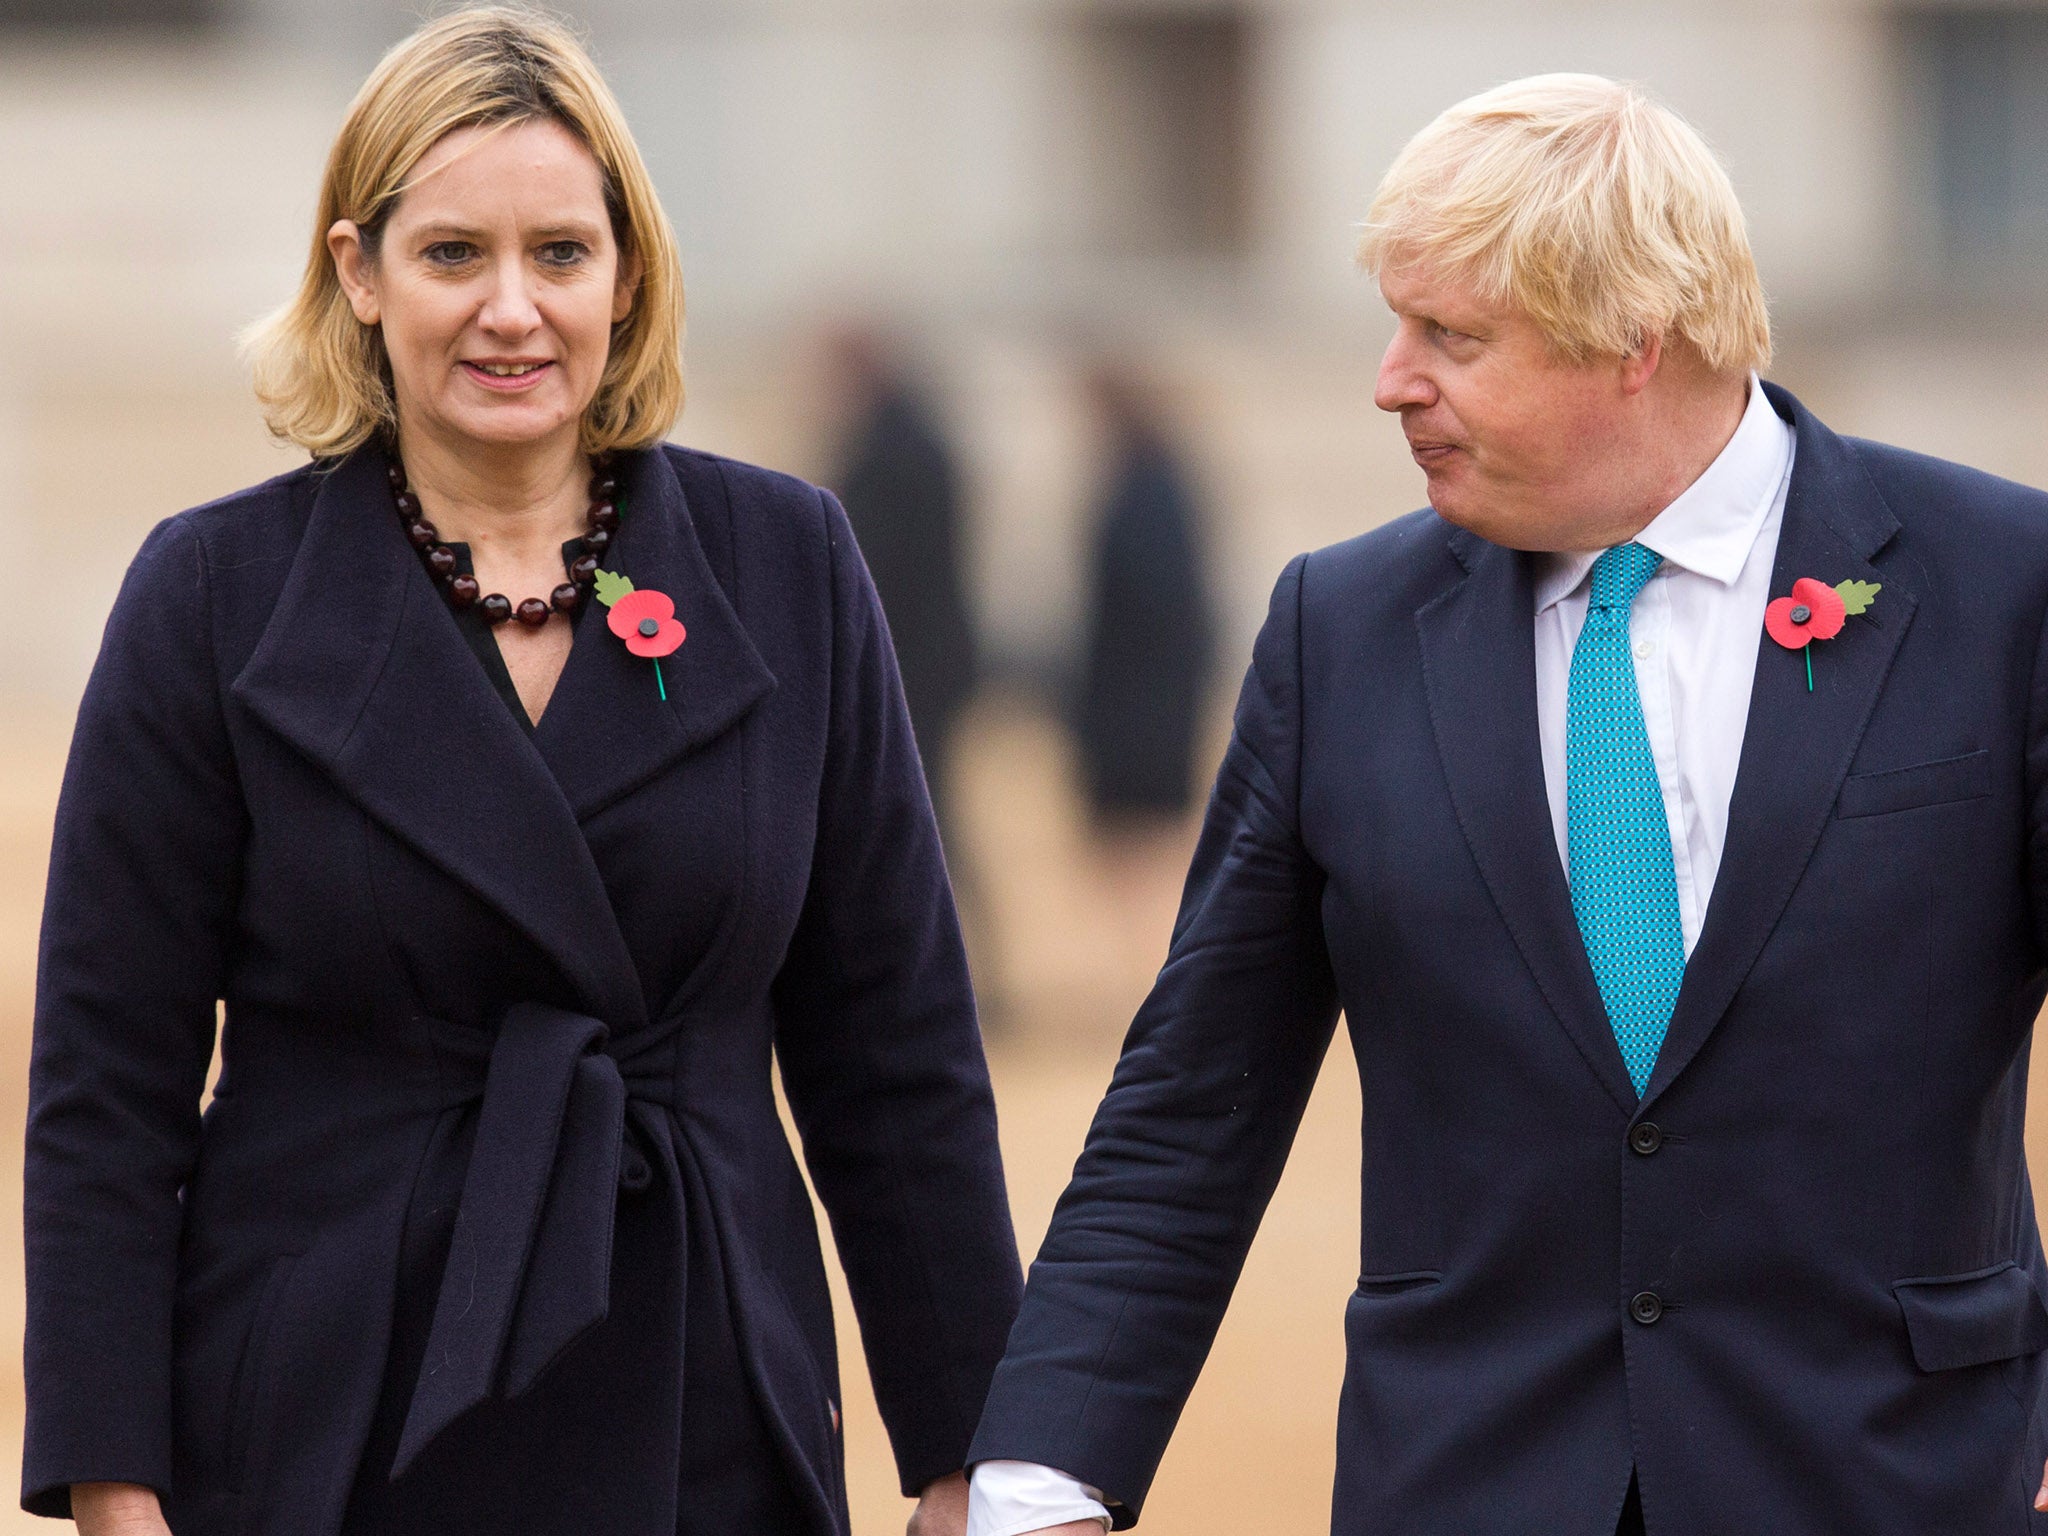 Rudd apparently wearied of Johnson when they dined together on Thursday and she couldn’t persuade him to abandon his commitment to pursuing a no-deal Brexit